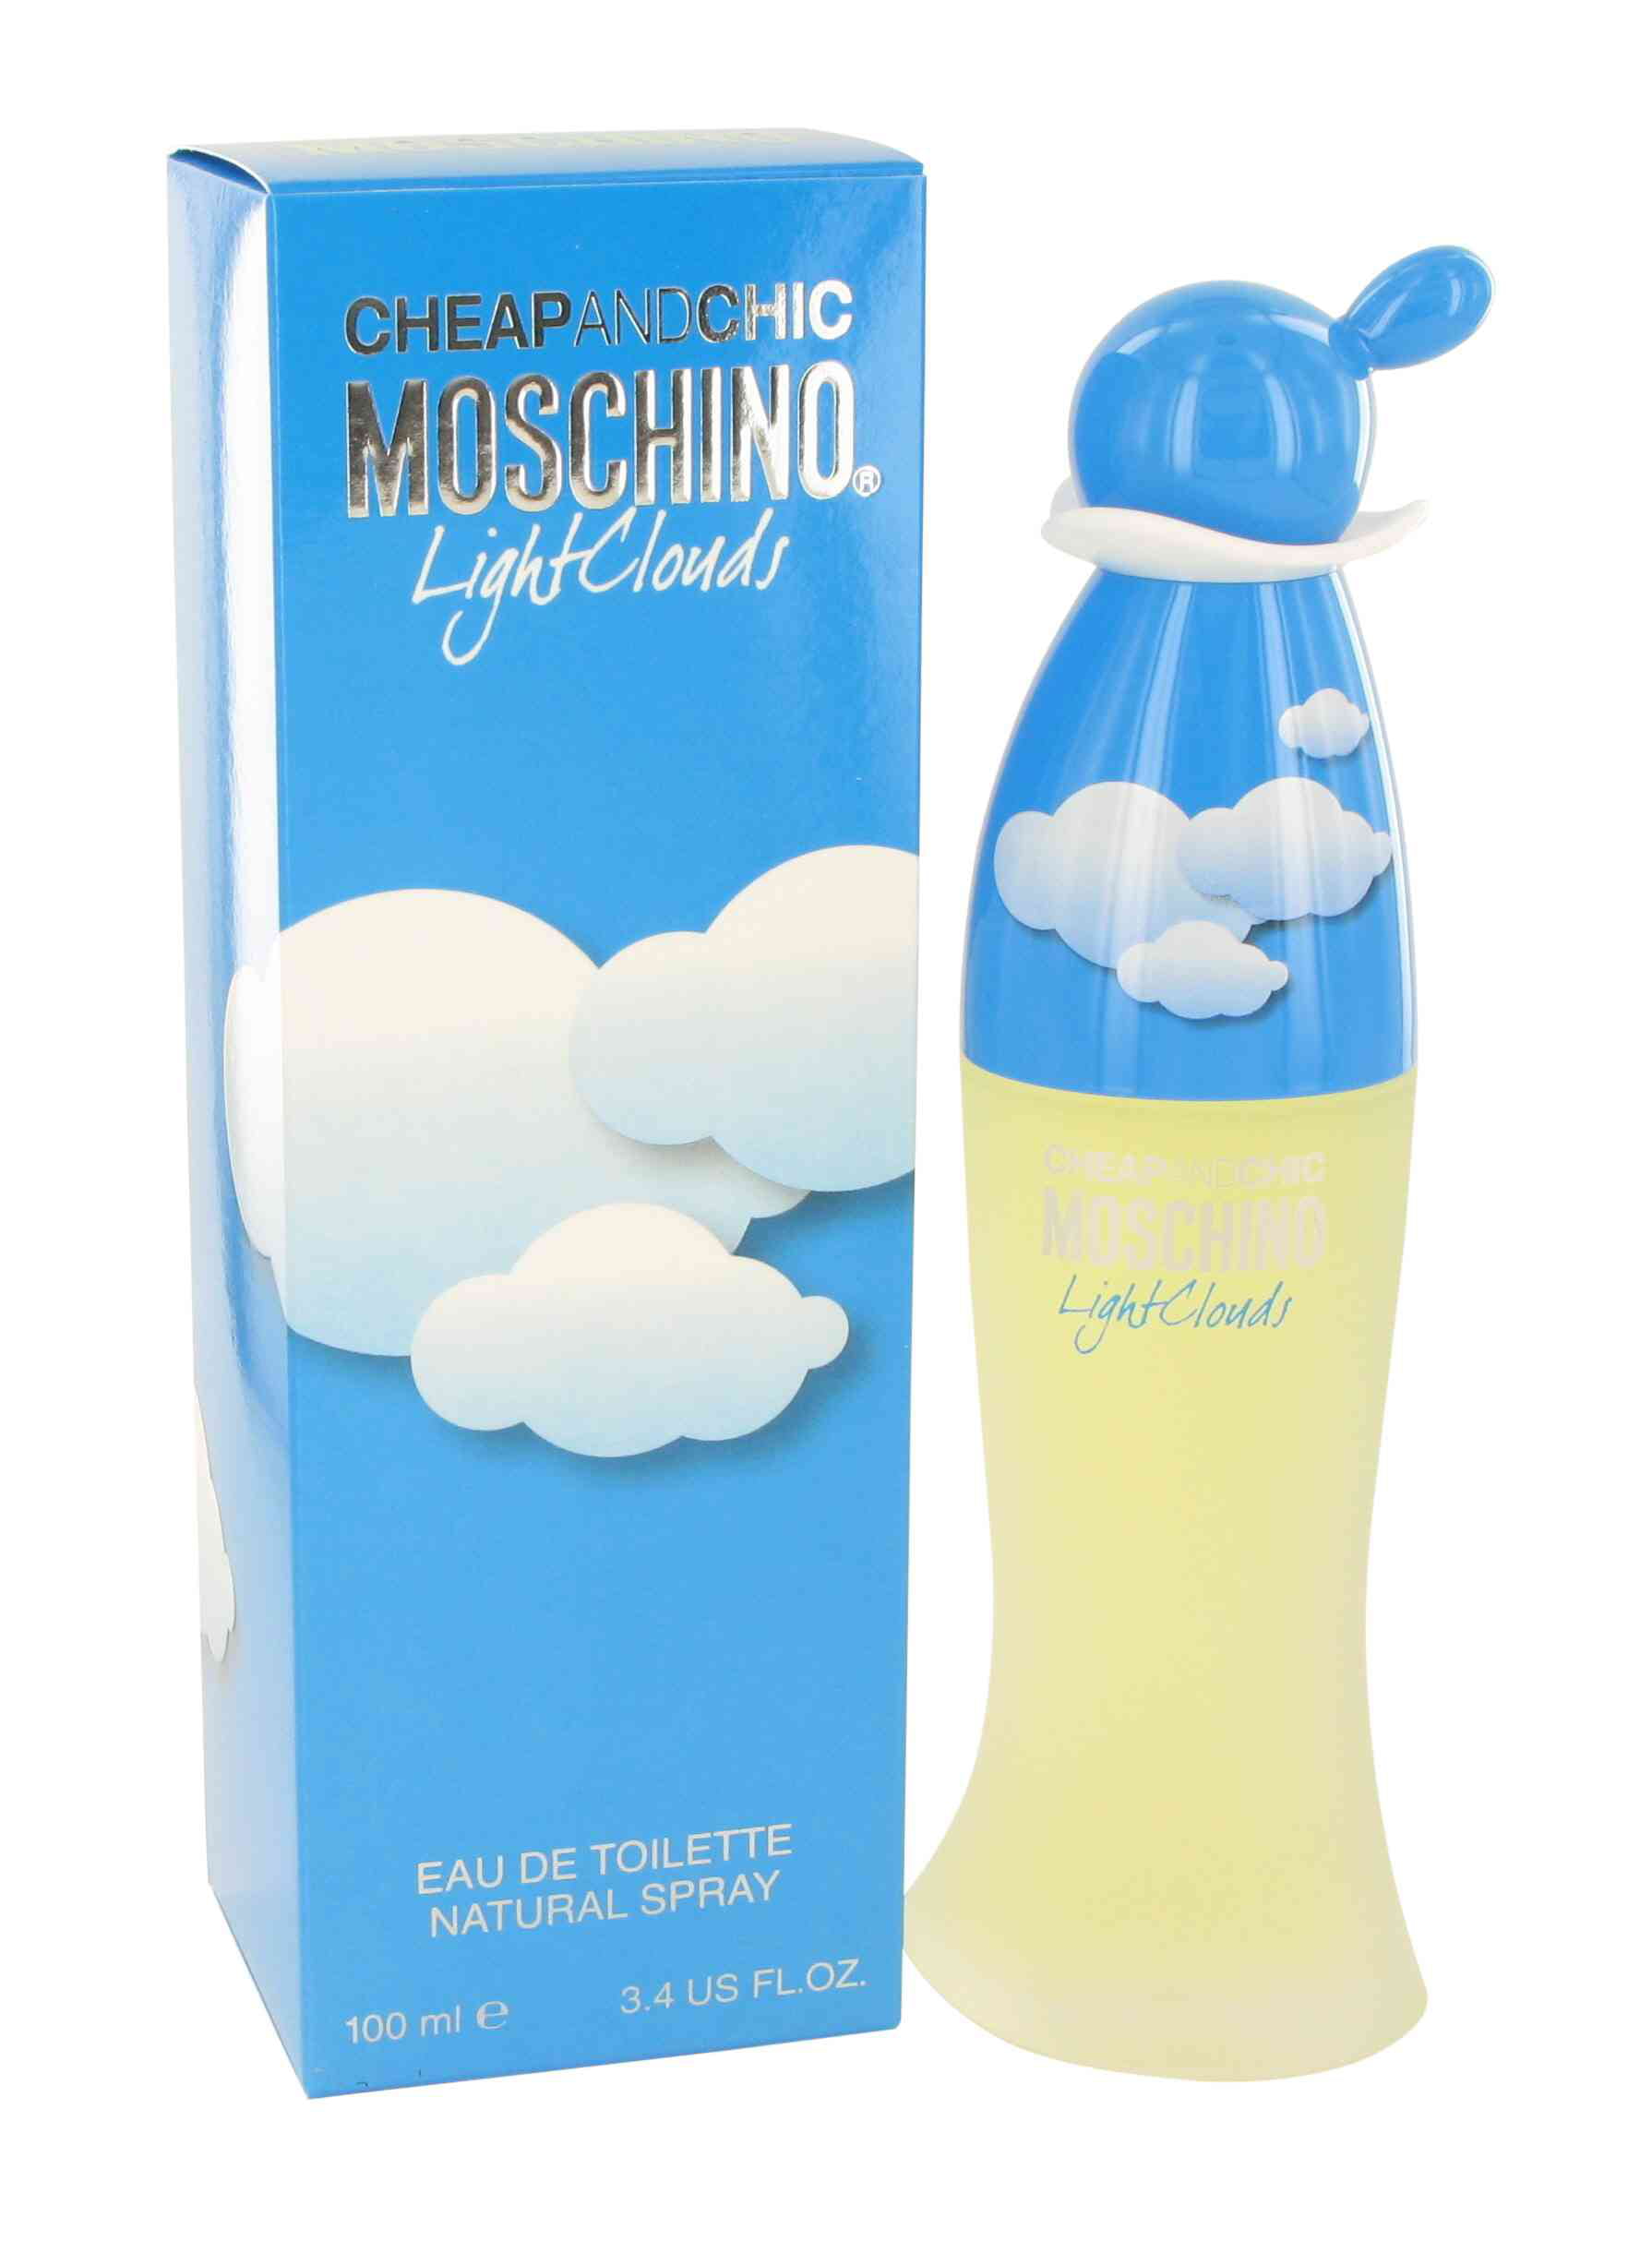 Moschino - Cheap and Chic Light Clouds 